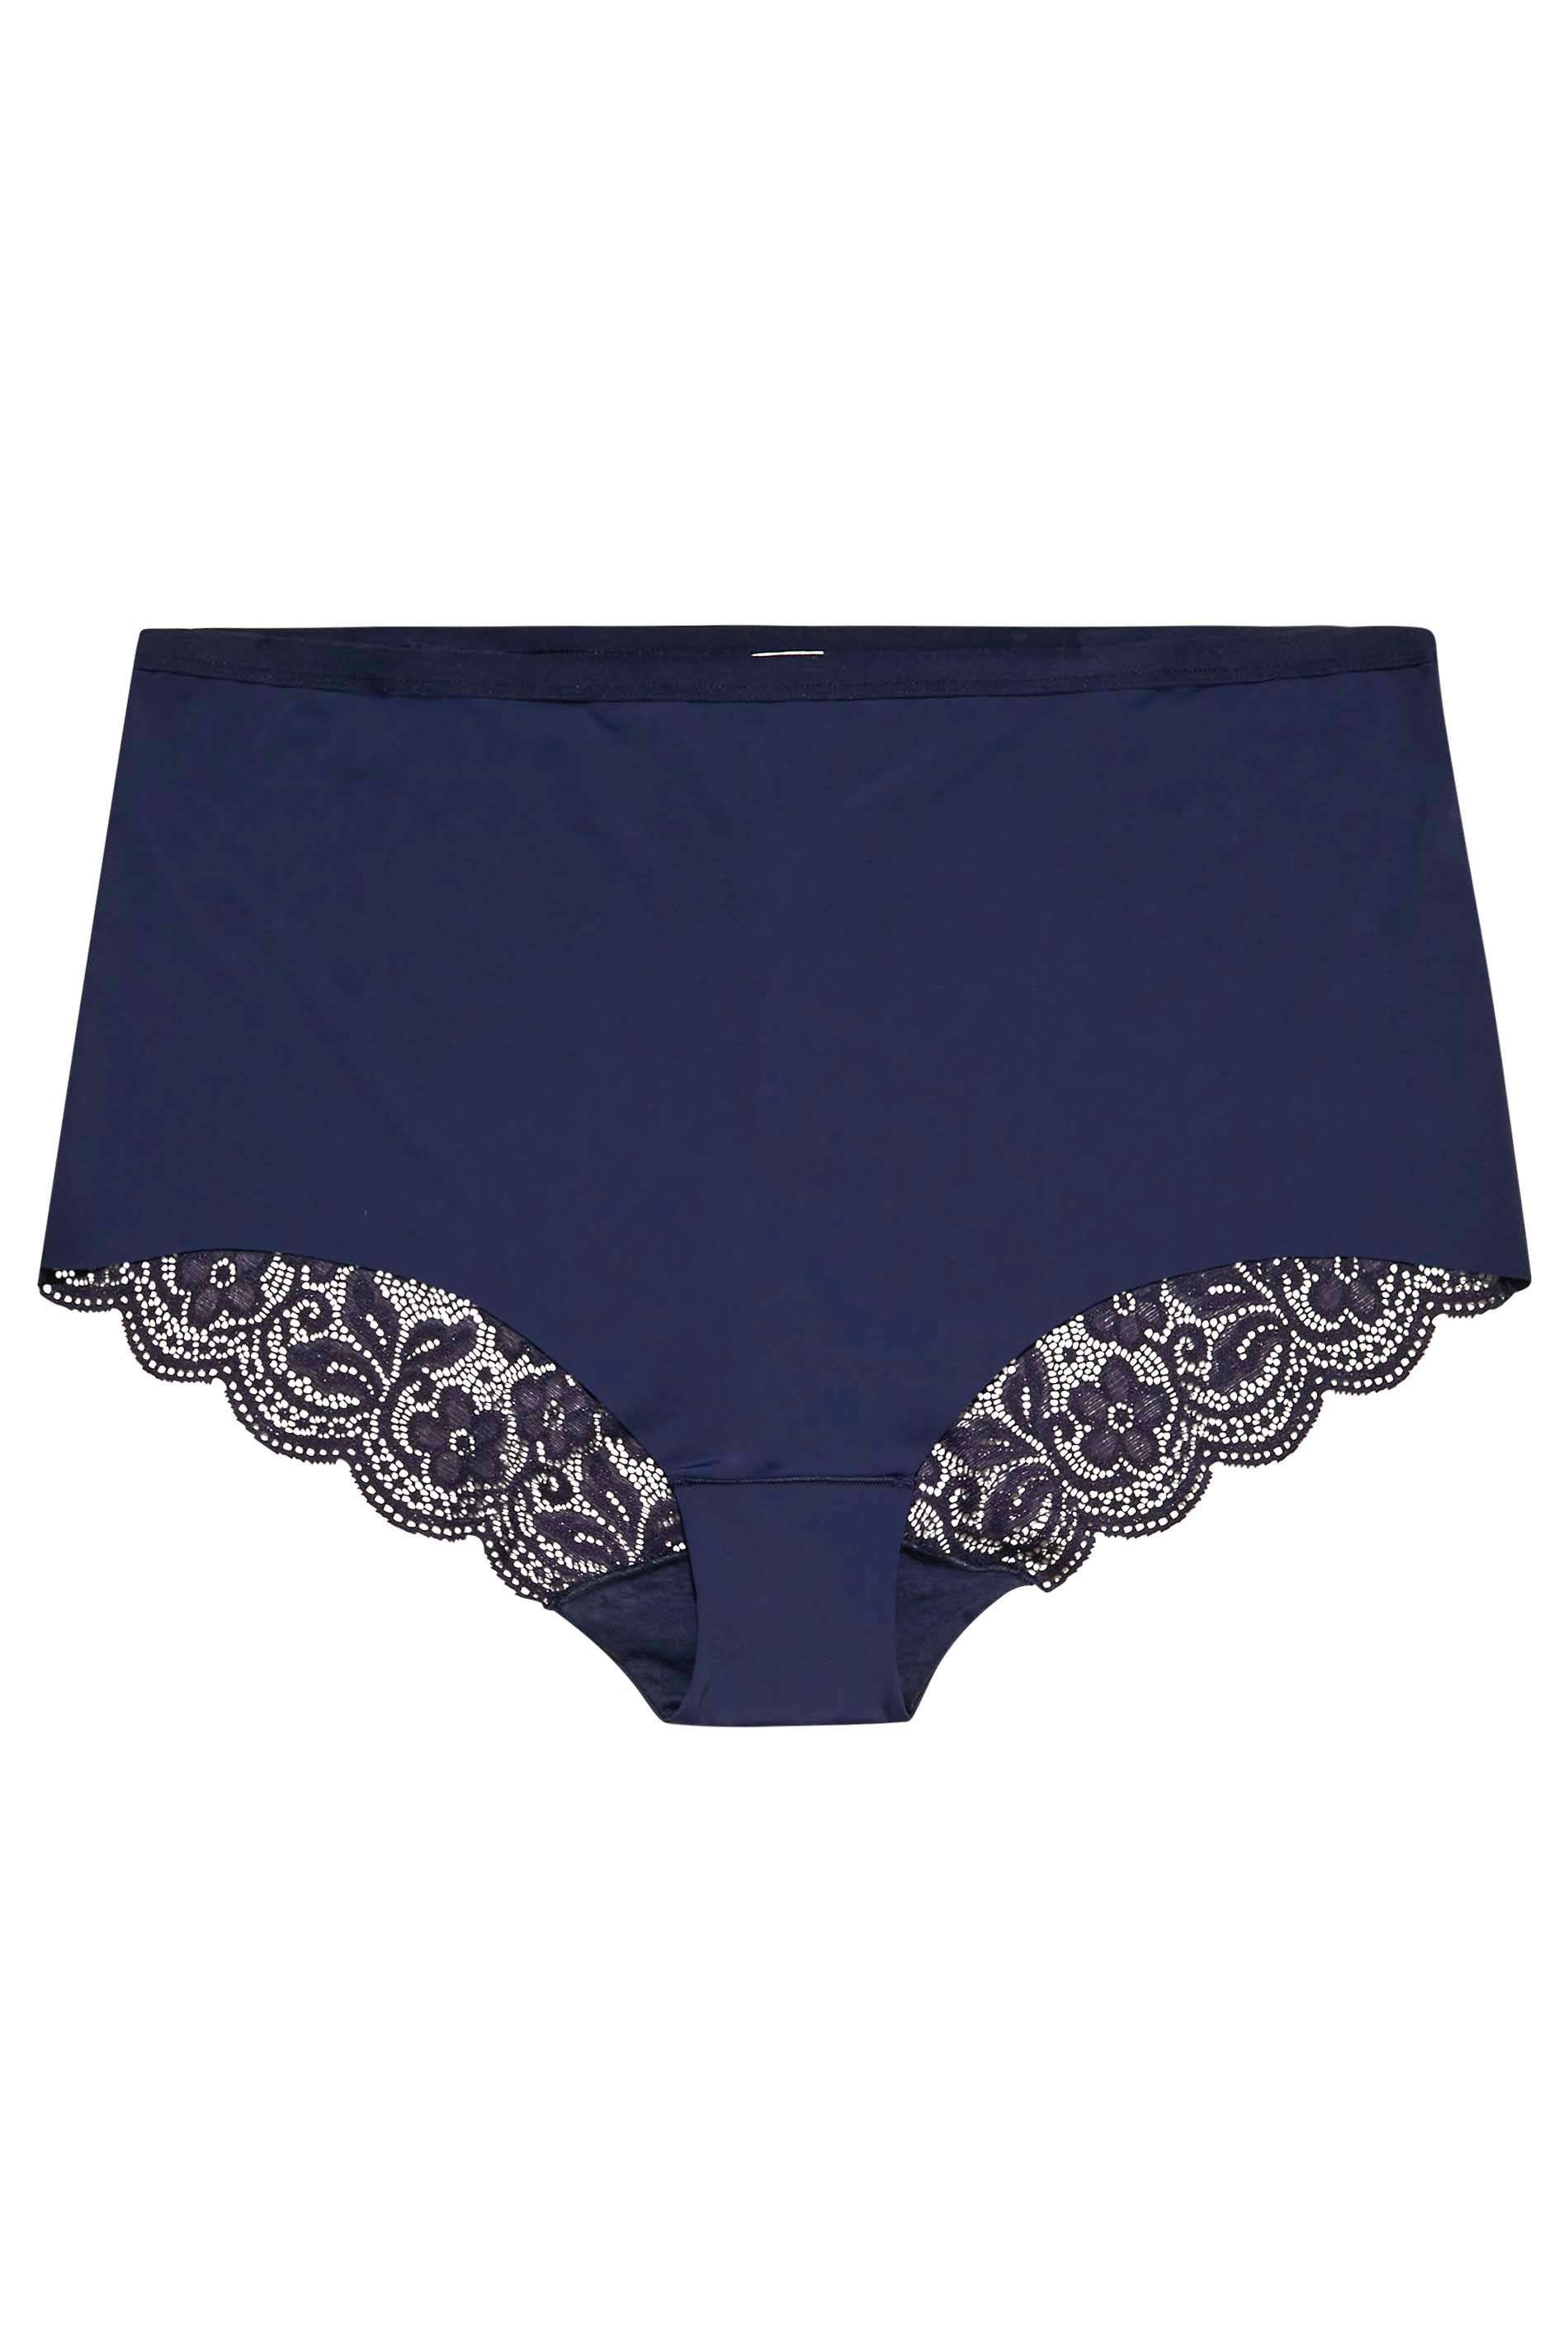 Plus Size Navy Blue Lace Back High Waisted Knickers | Yours Clothing 3